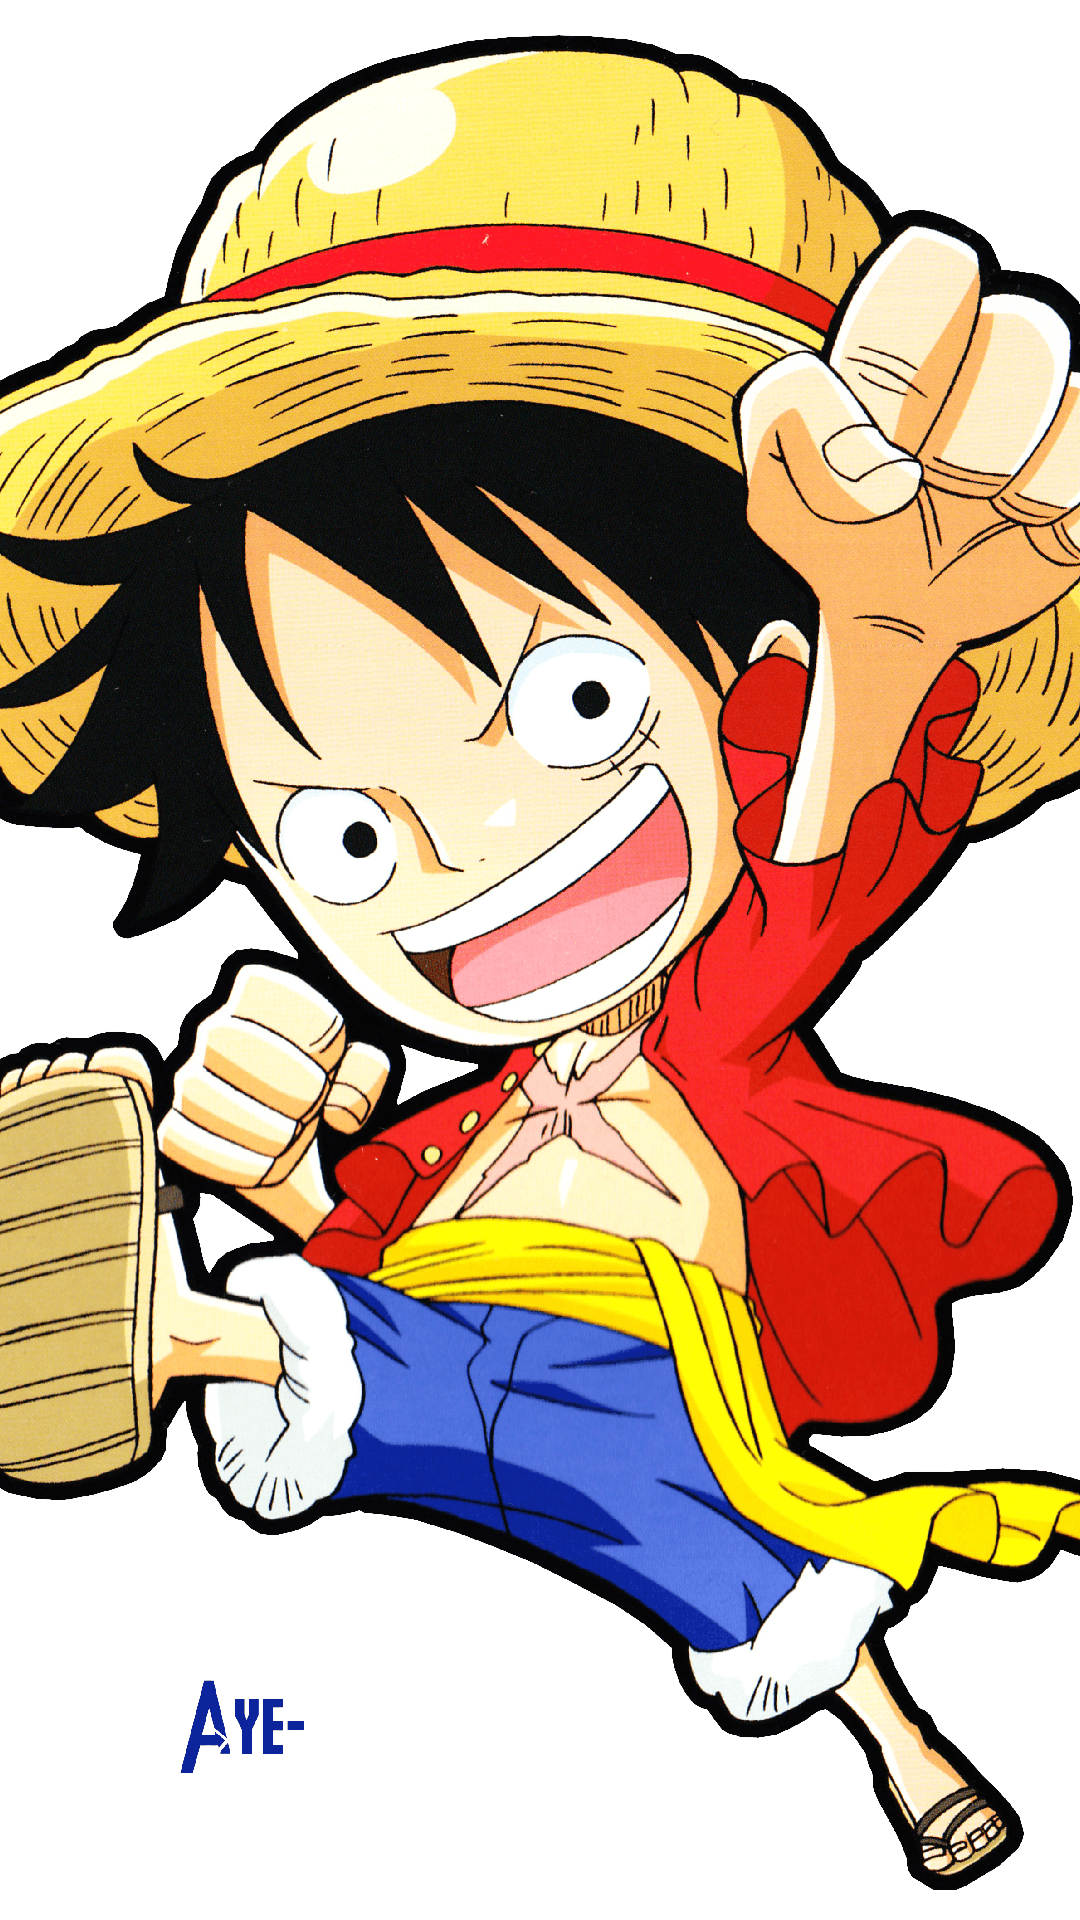 1400 Monkey D Luffy HD Wallpapers and Backgrounds